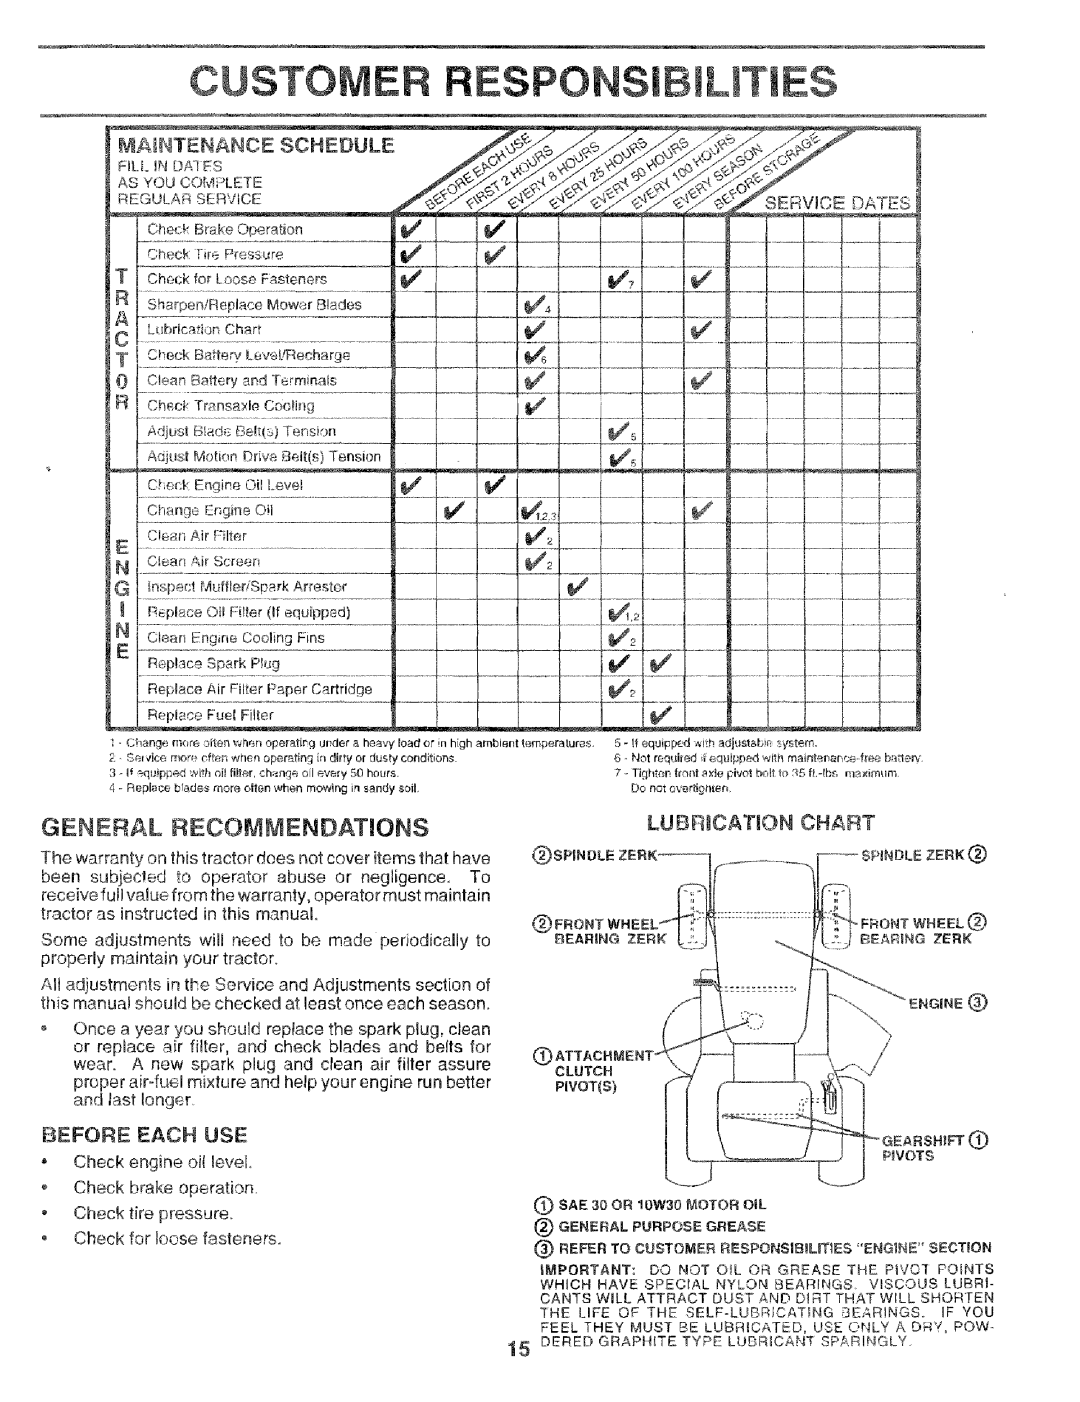 Craftsman 917.256544 Er Fiespones, General Recommendations, Lubr+Cation Chart, Maihtenance Schedule, Before Each Use 